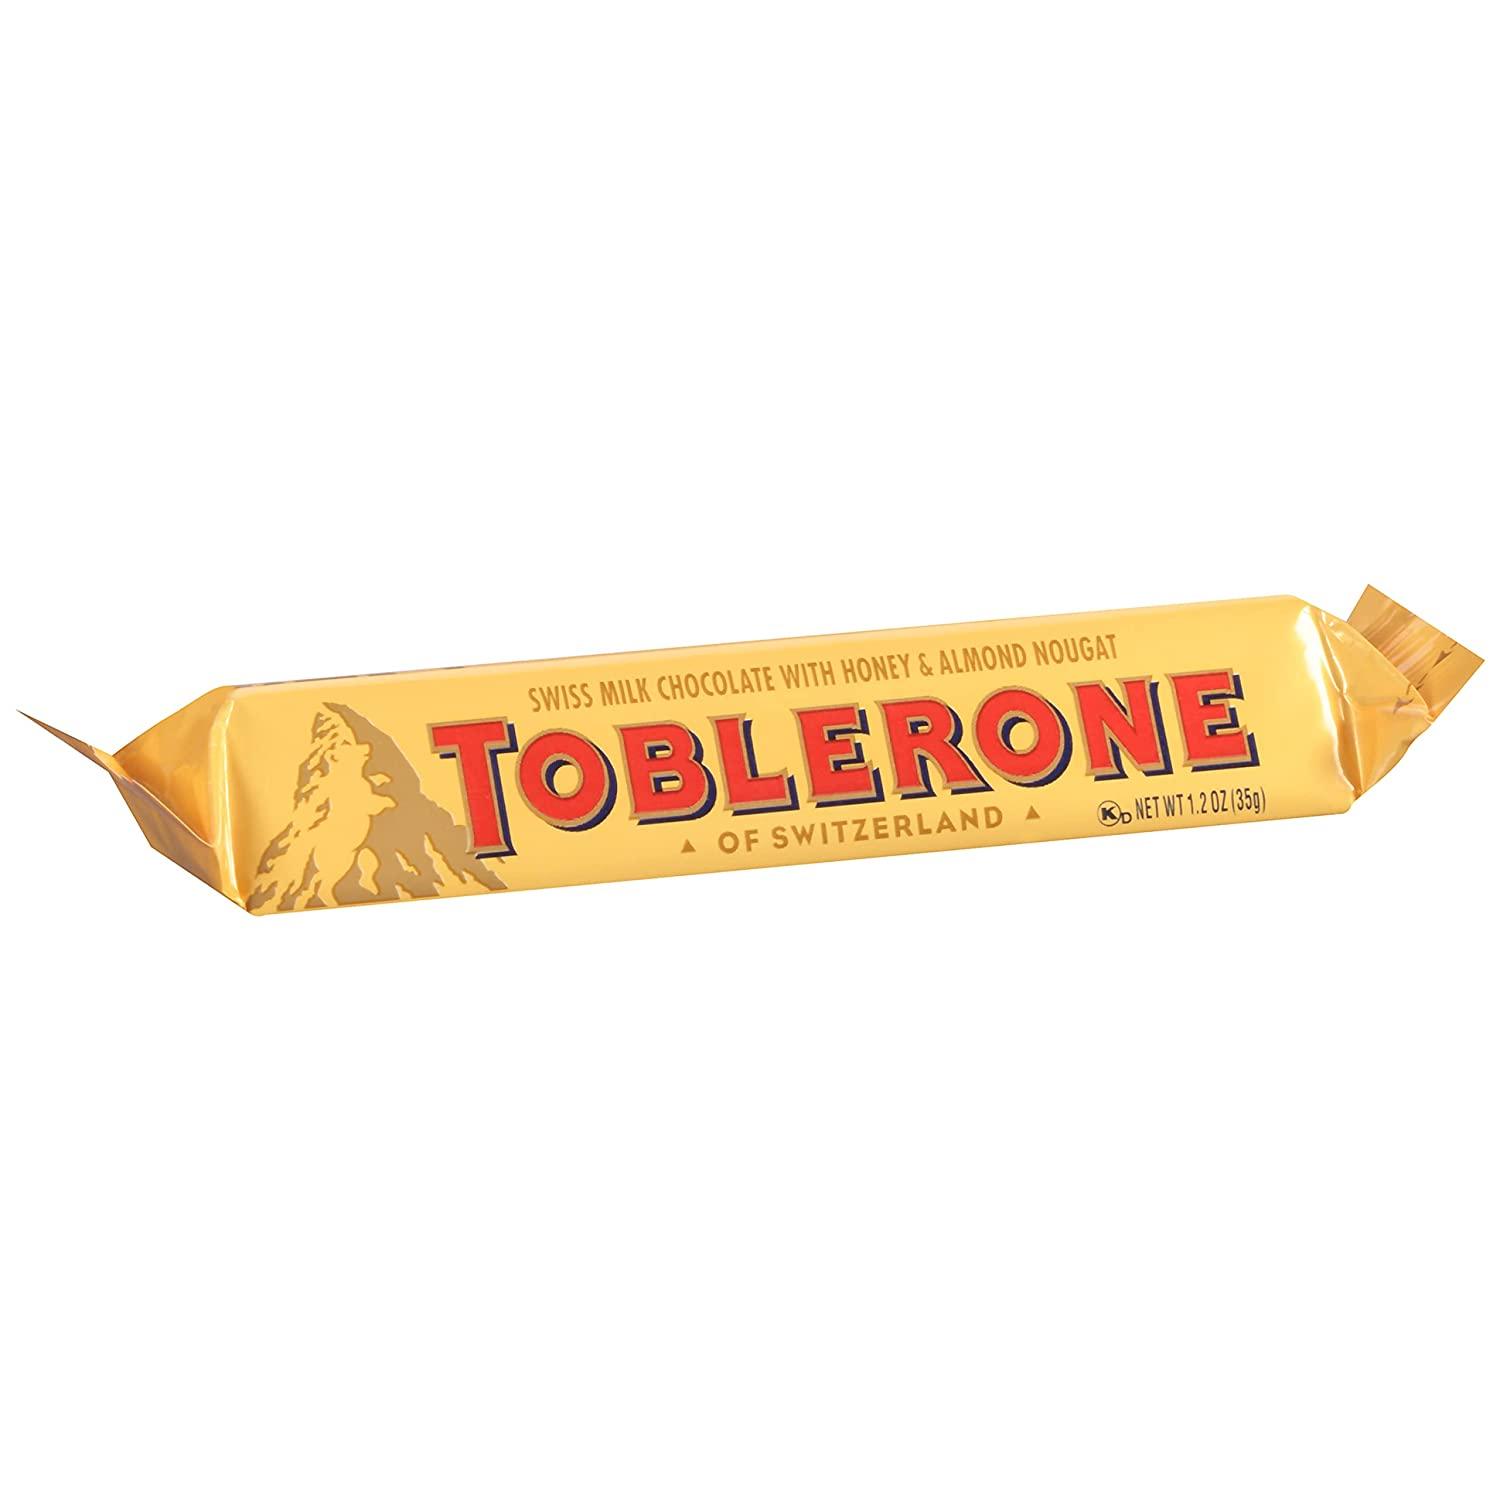 Toblerone Milk Chocolate Bar with Honey and Almond Nougat